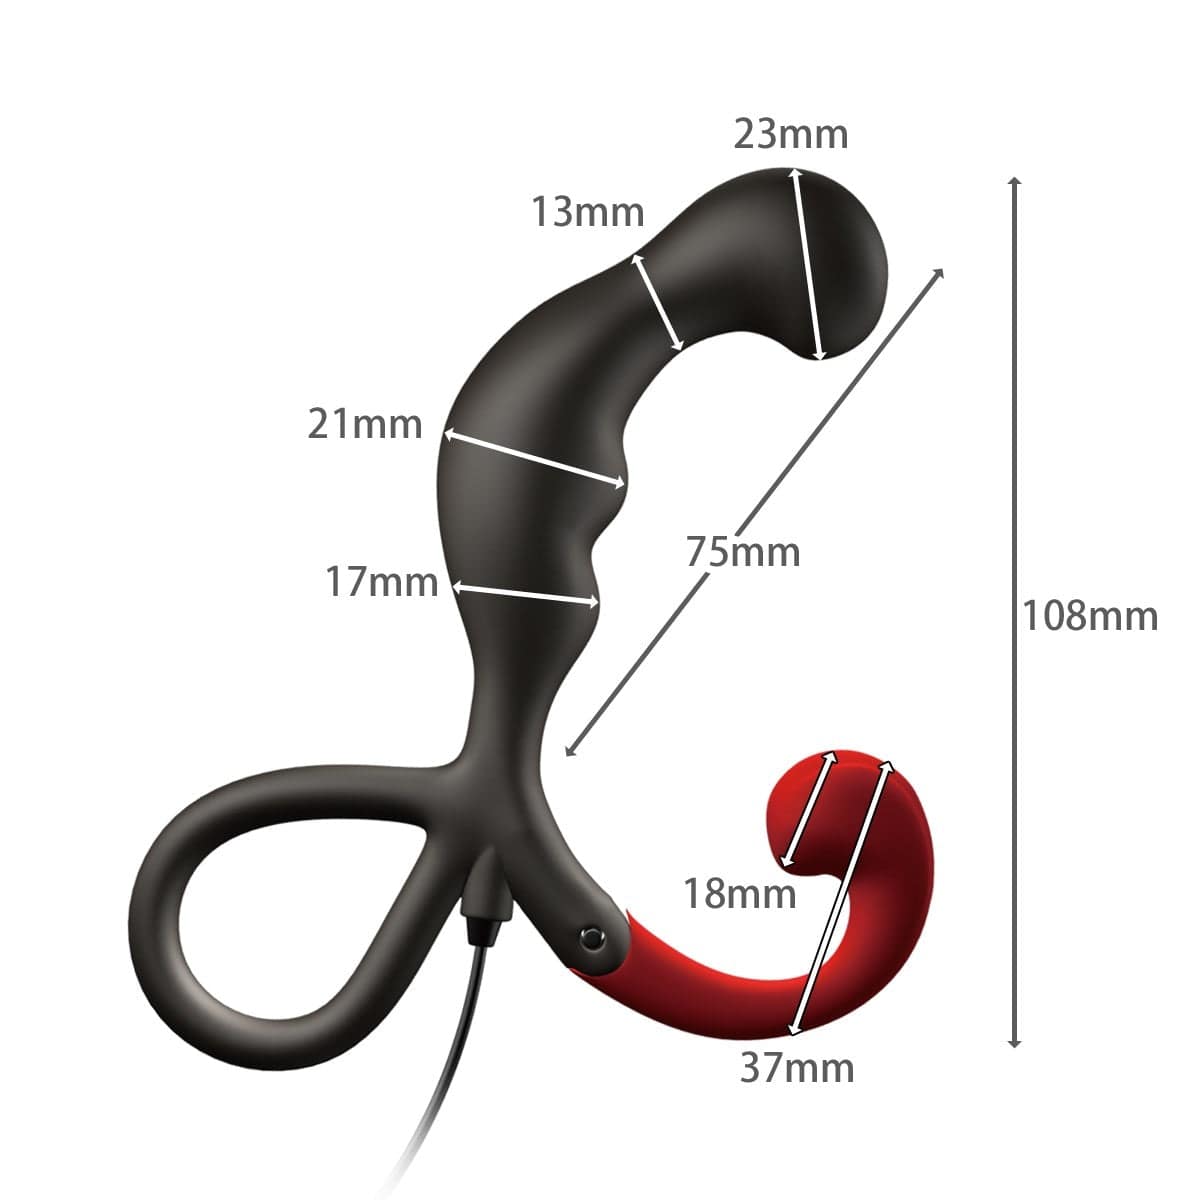 Wild One - Enemable R Type 2 Remote Control Prostate Massager (Black) Remote Control Anal Plug (Vibration) Non Rechargeable 621274931 CherryAffairs